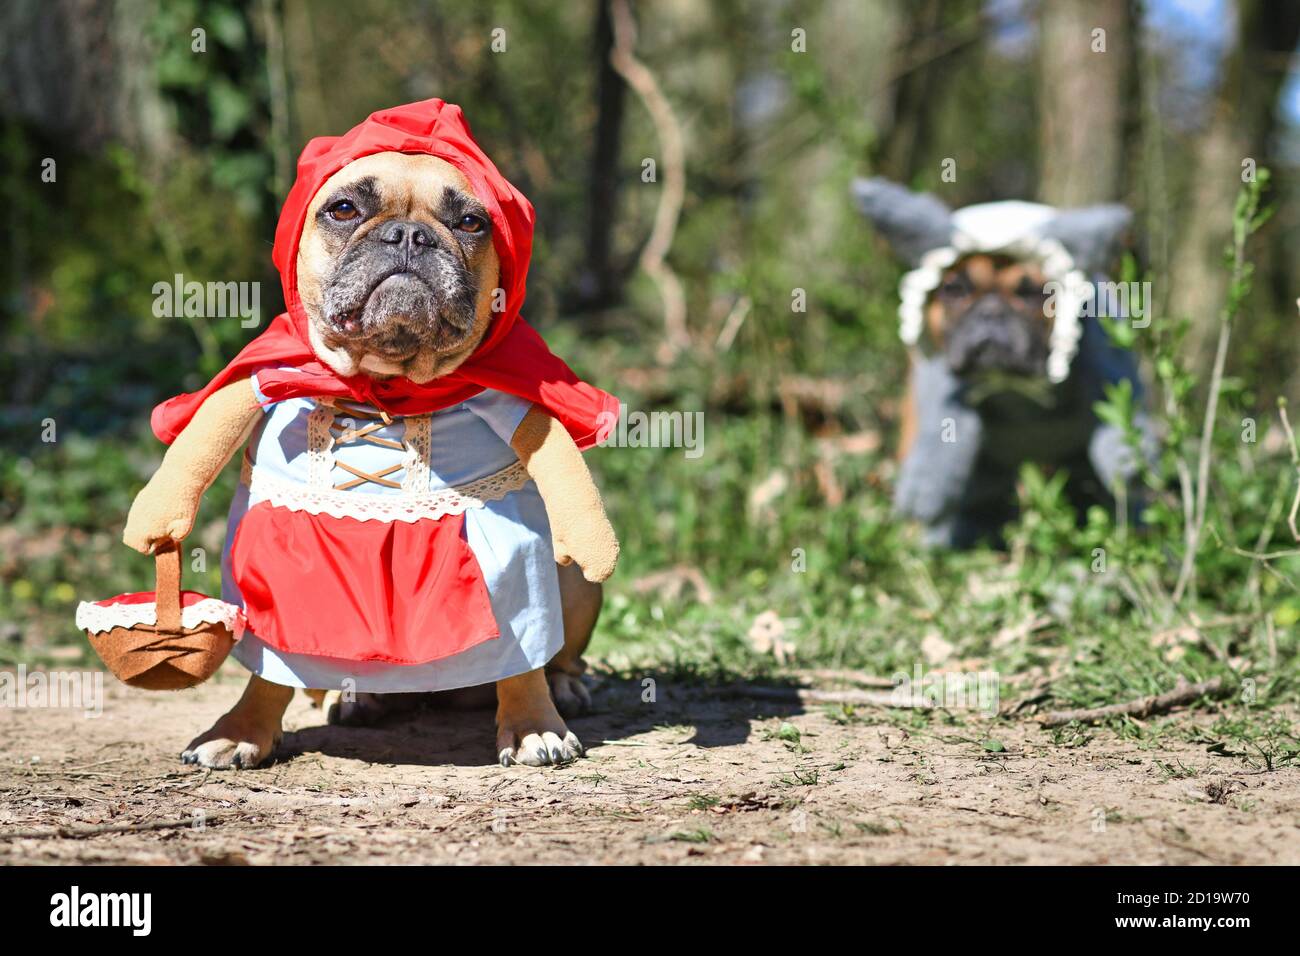 Funny  French Bulldog dogs dressed up with Halloween costume as fairytale character Little Red Riding Hood with fake arms and basket with Big Bad Wolf Stock Photo